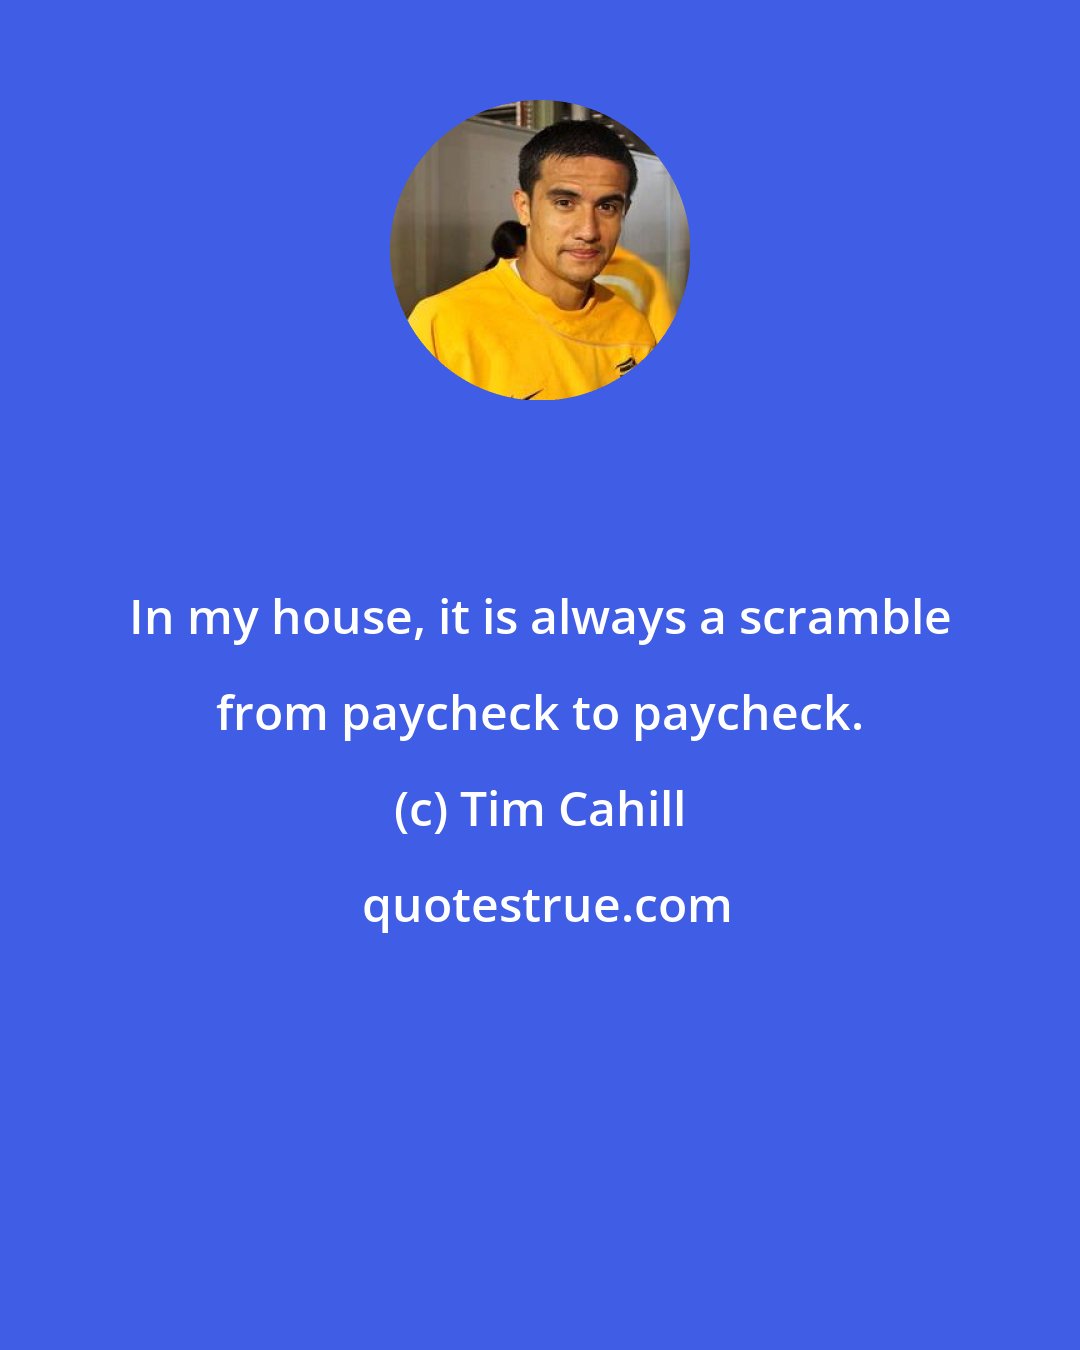 Tim Cahill: In my house, it is always a scramble from paycheck to paycheck.